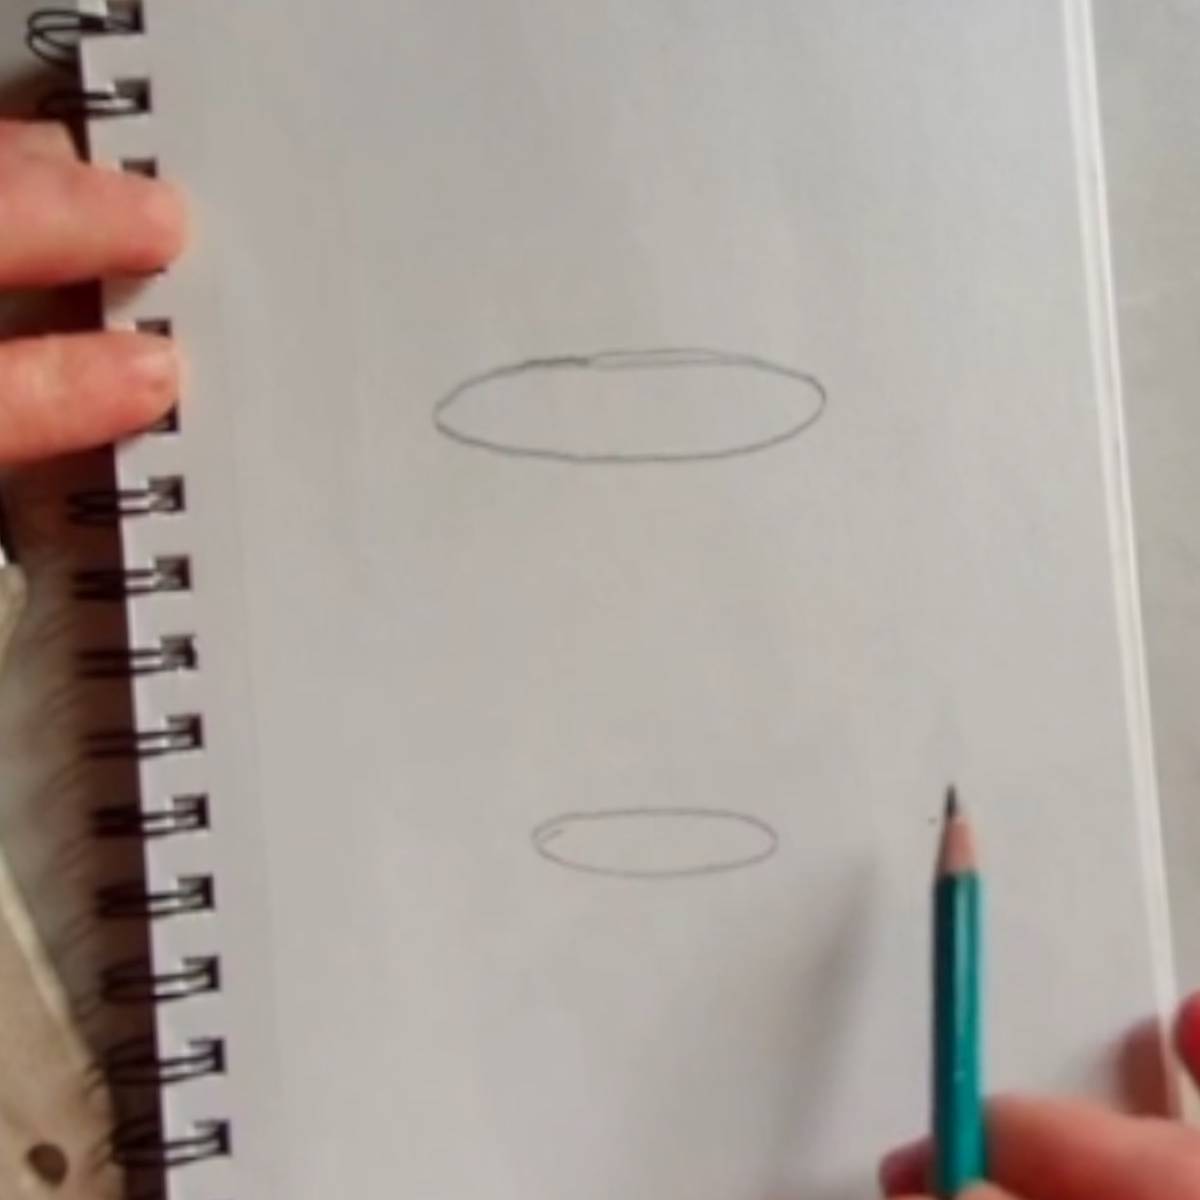 Beginning sketch of a coffee mug in pencil with two ovals one above the other.